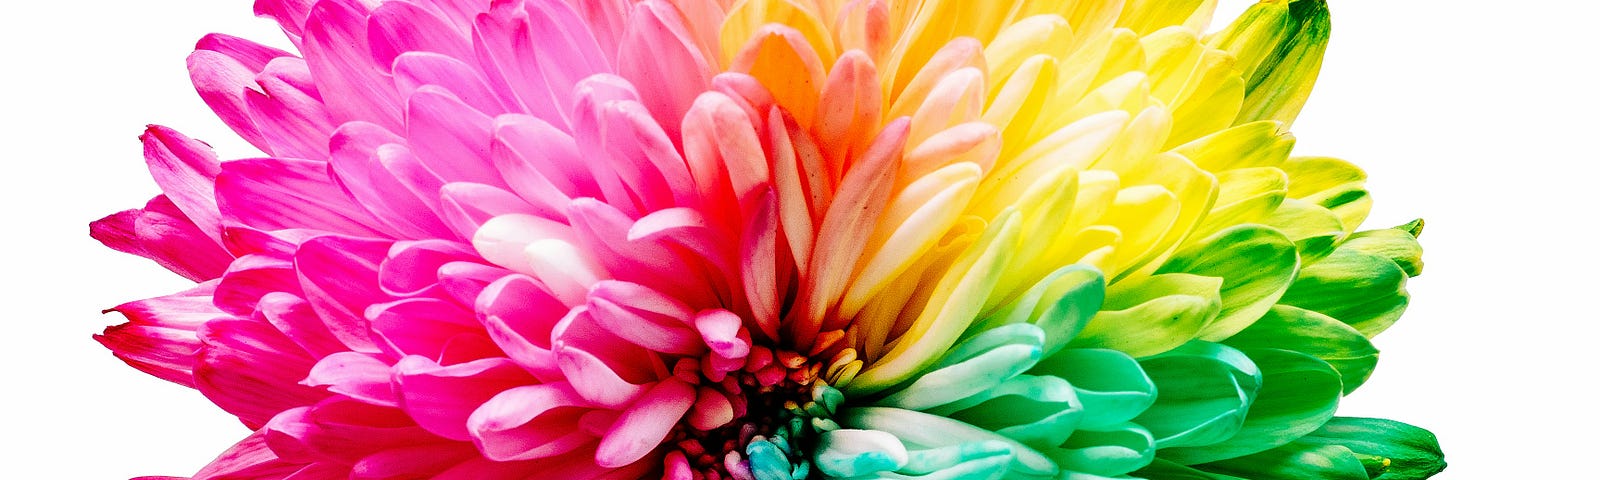 Multicoloured chrysanthemum flower with pink, yellow, green, blue and red petals